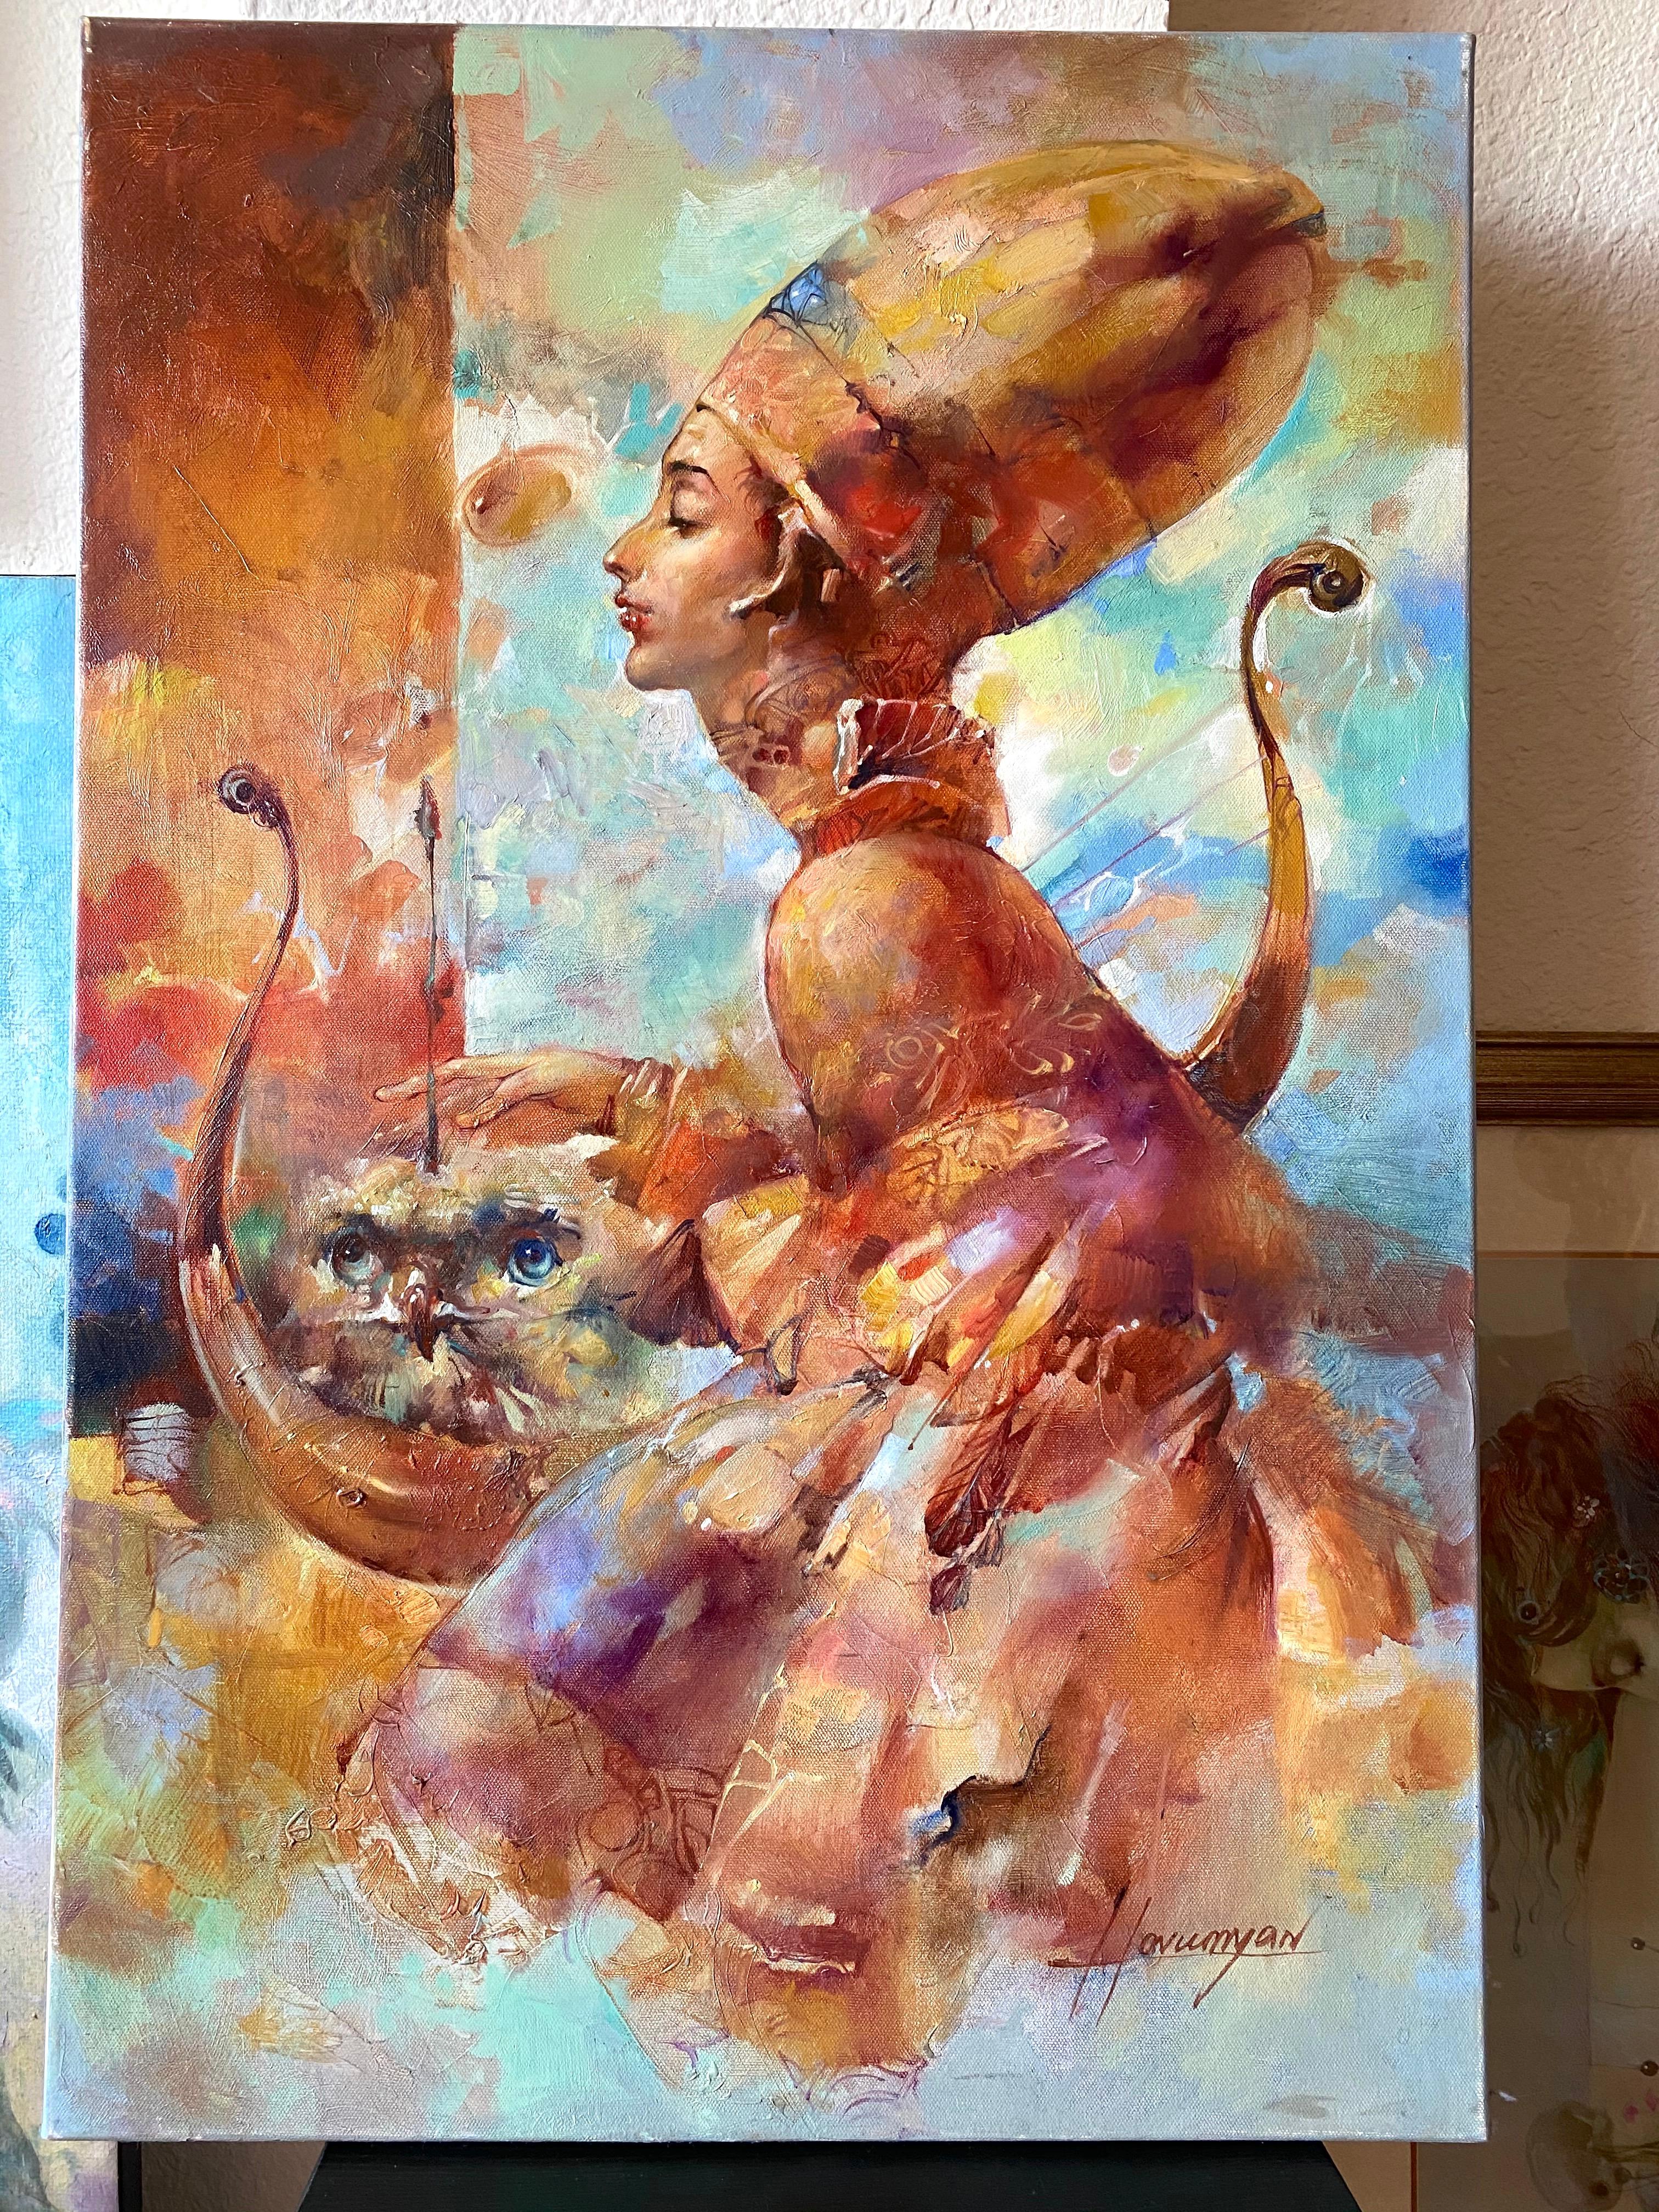 Musician, Original oil Painting, Ready to Hang - Brown Figurative Painting by Vahe Yeremyan